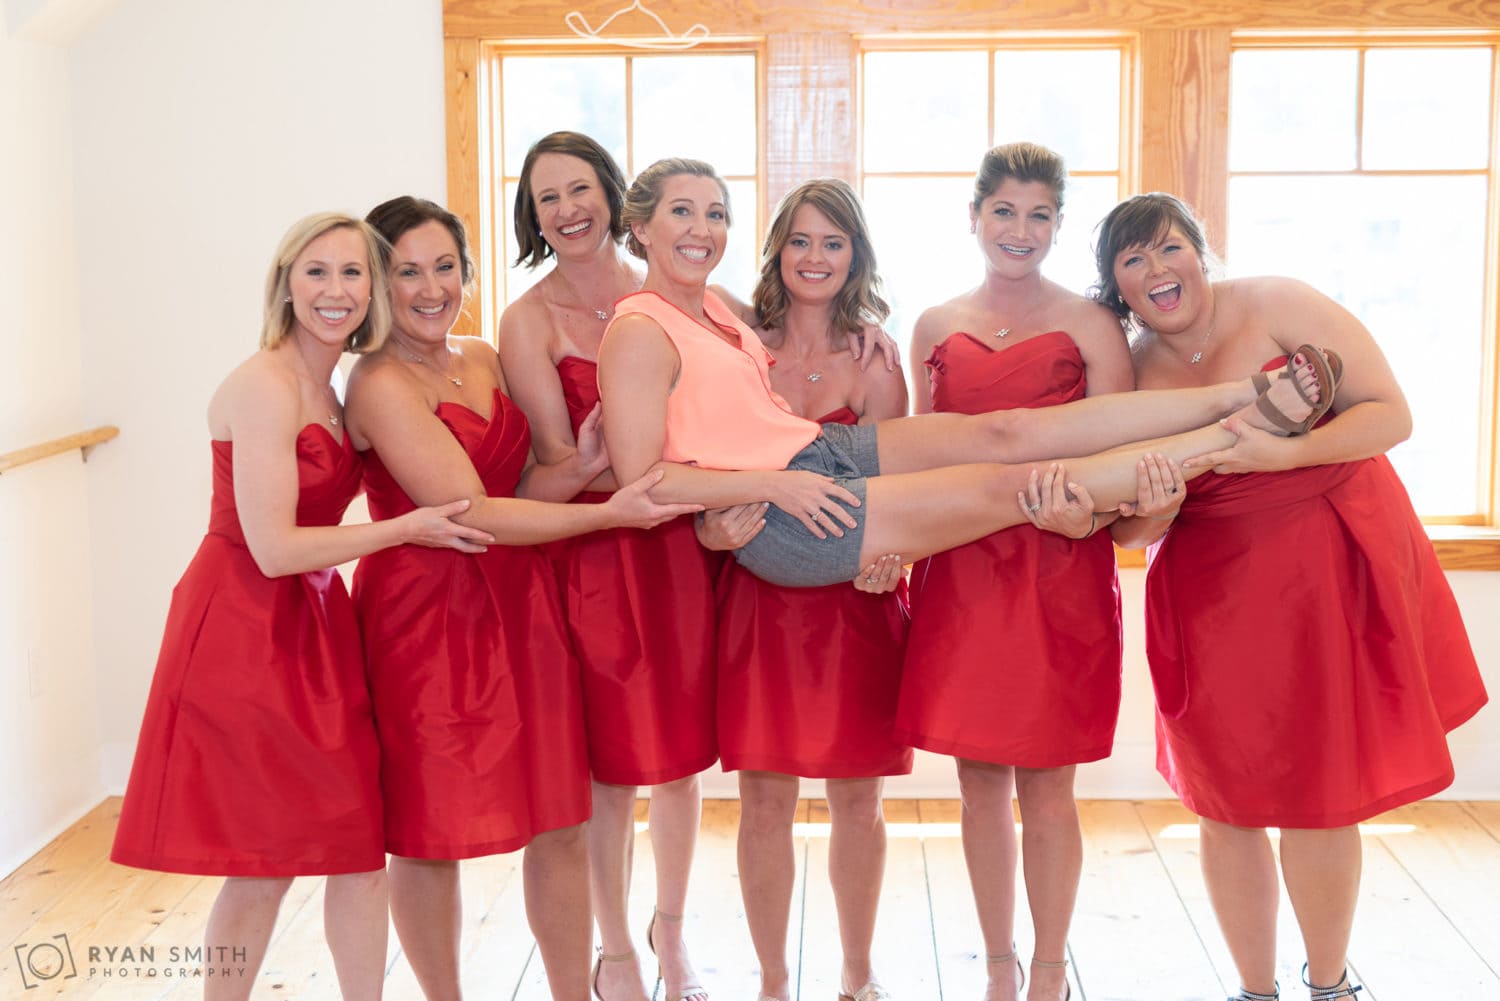 Bridesmaids picking up the bride Stox & Co Litchfield